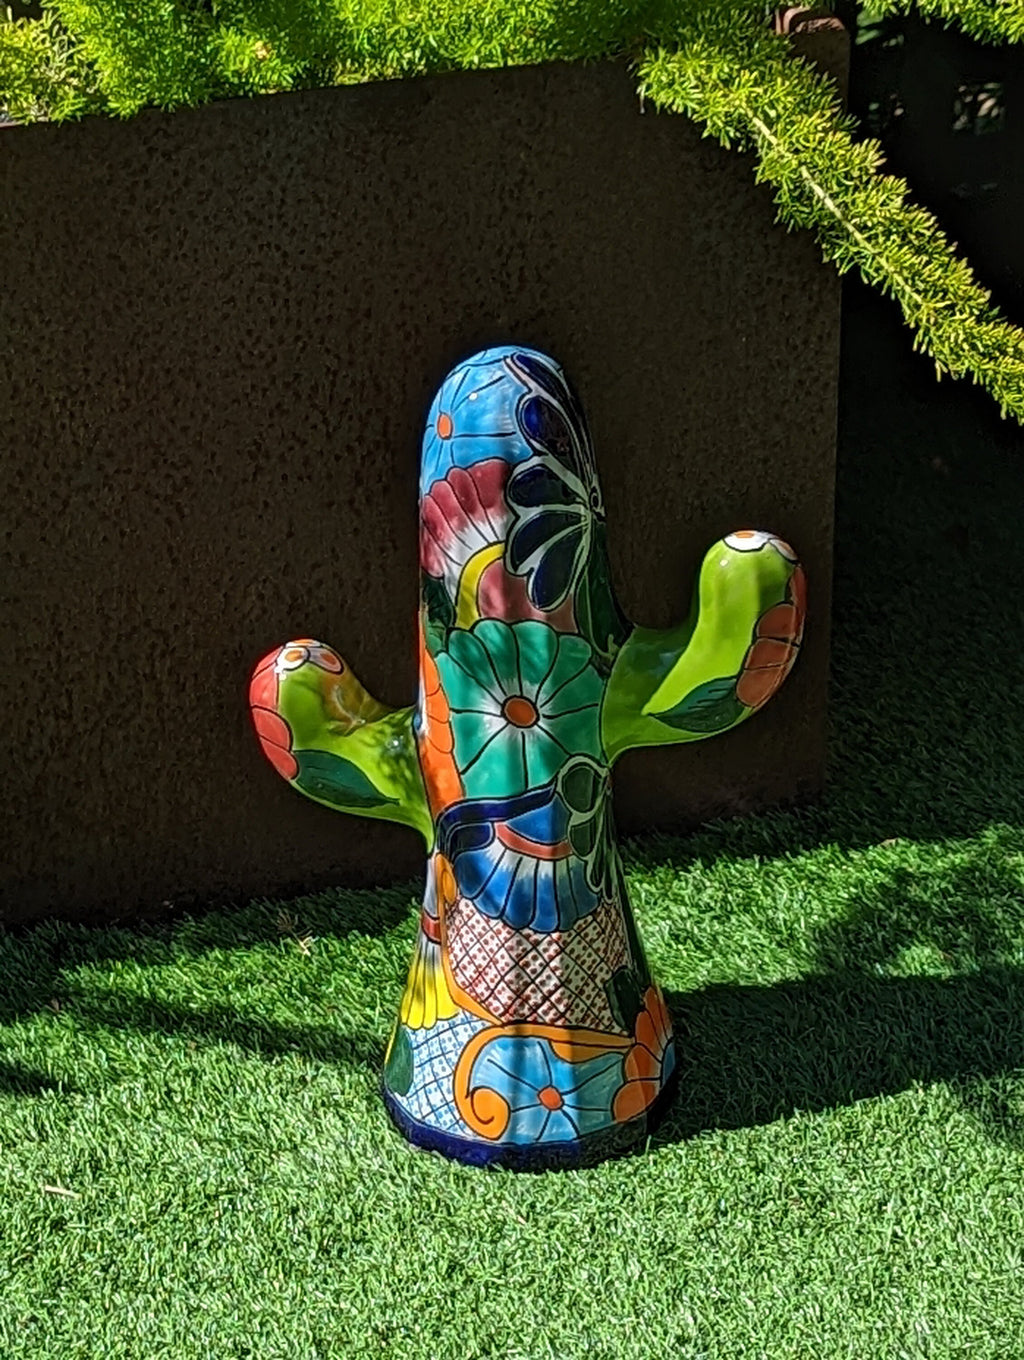 Saguaro Cactus Decor is Colorful Mexican Talavera Pottery, Cactus Room Decor for Bedroom, Bathroom, Outdoor Decorations or Housewarming Gift